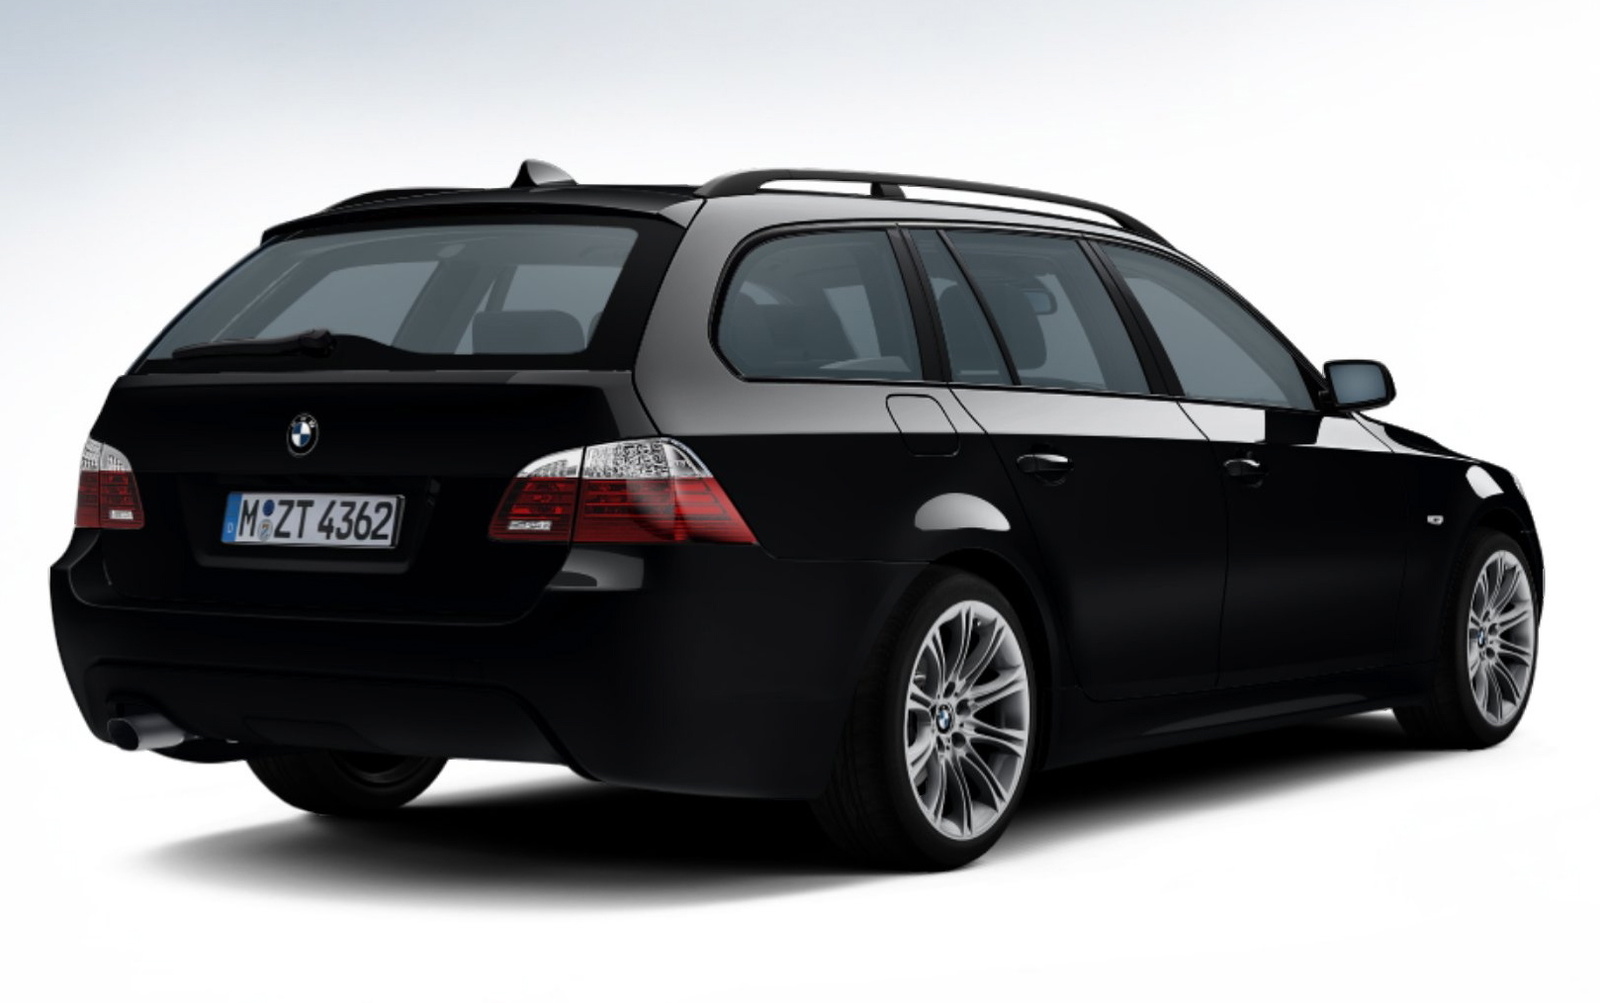 2007 Bmw 530xi with sports package #1